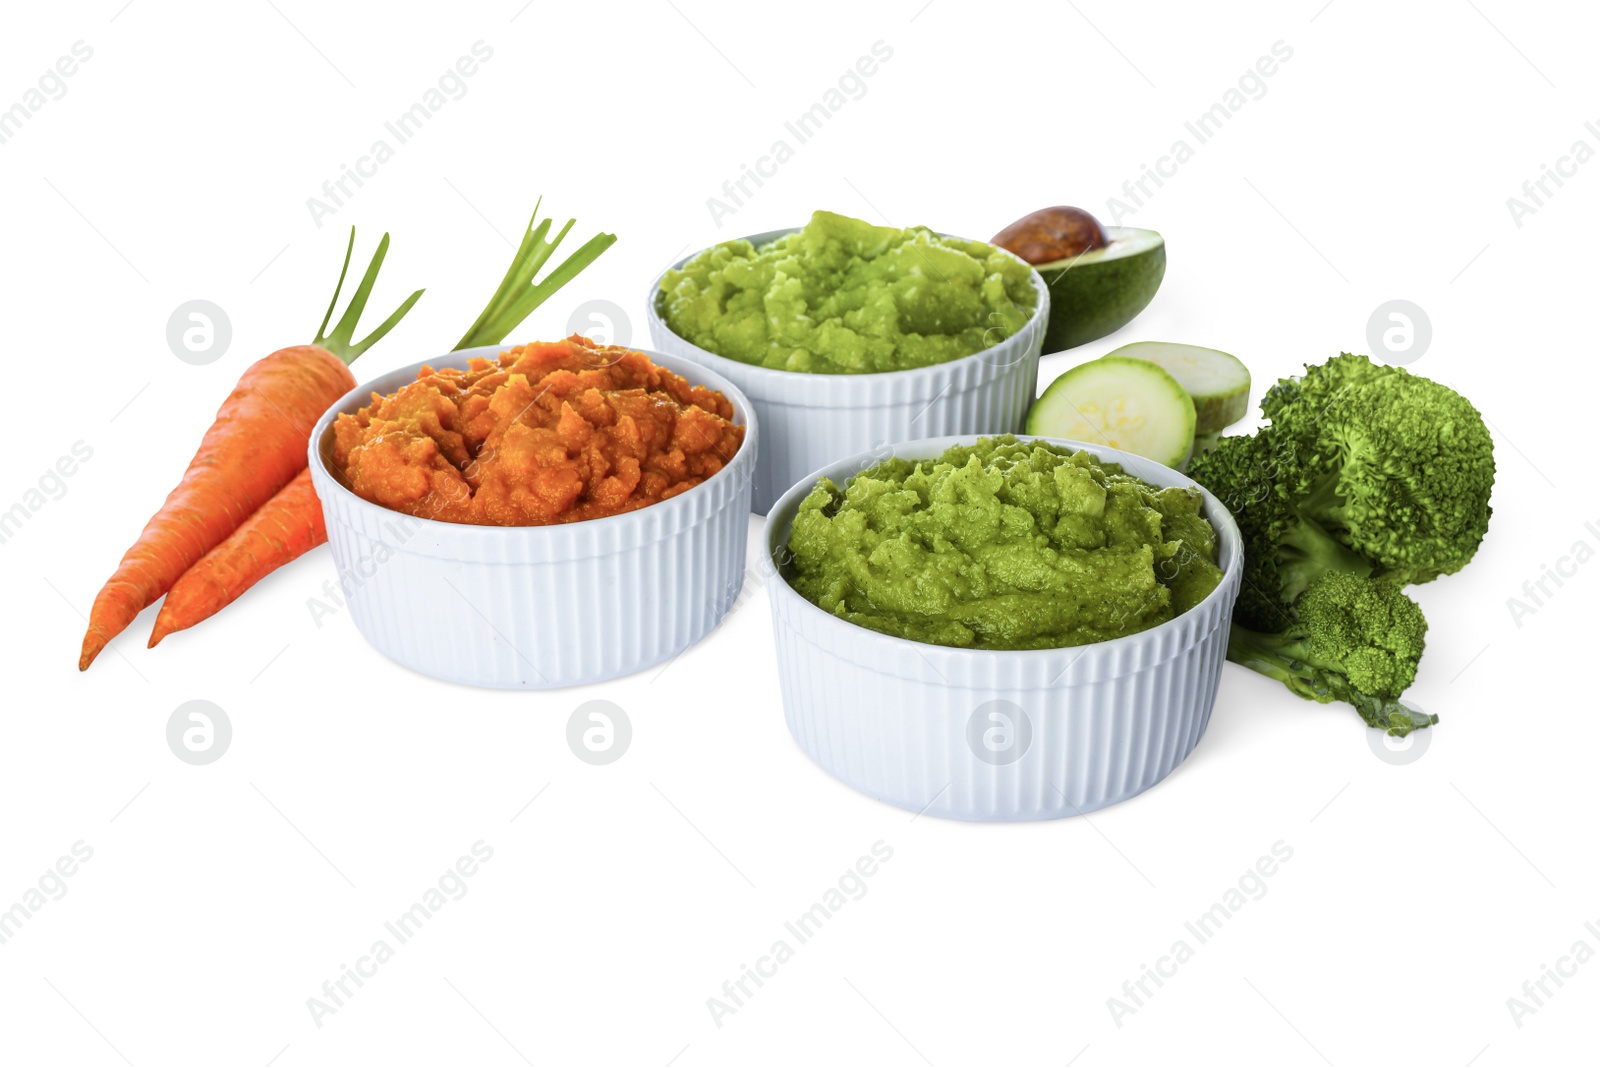 Photo of Different delicious puree in bowls and fresh ingredients on white background. Healthy food